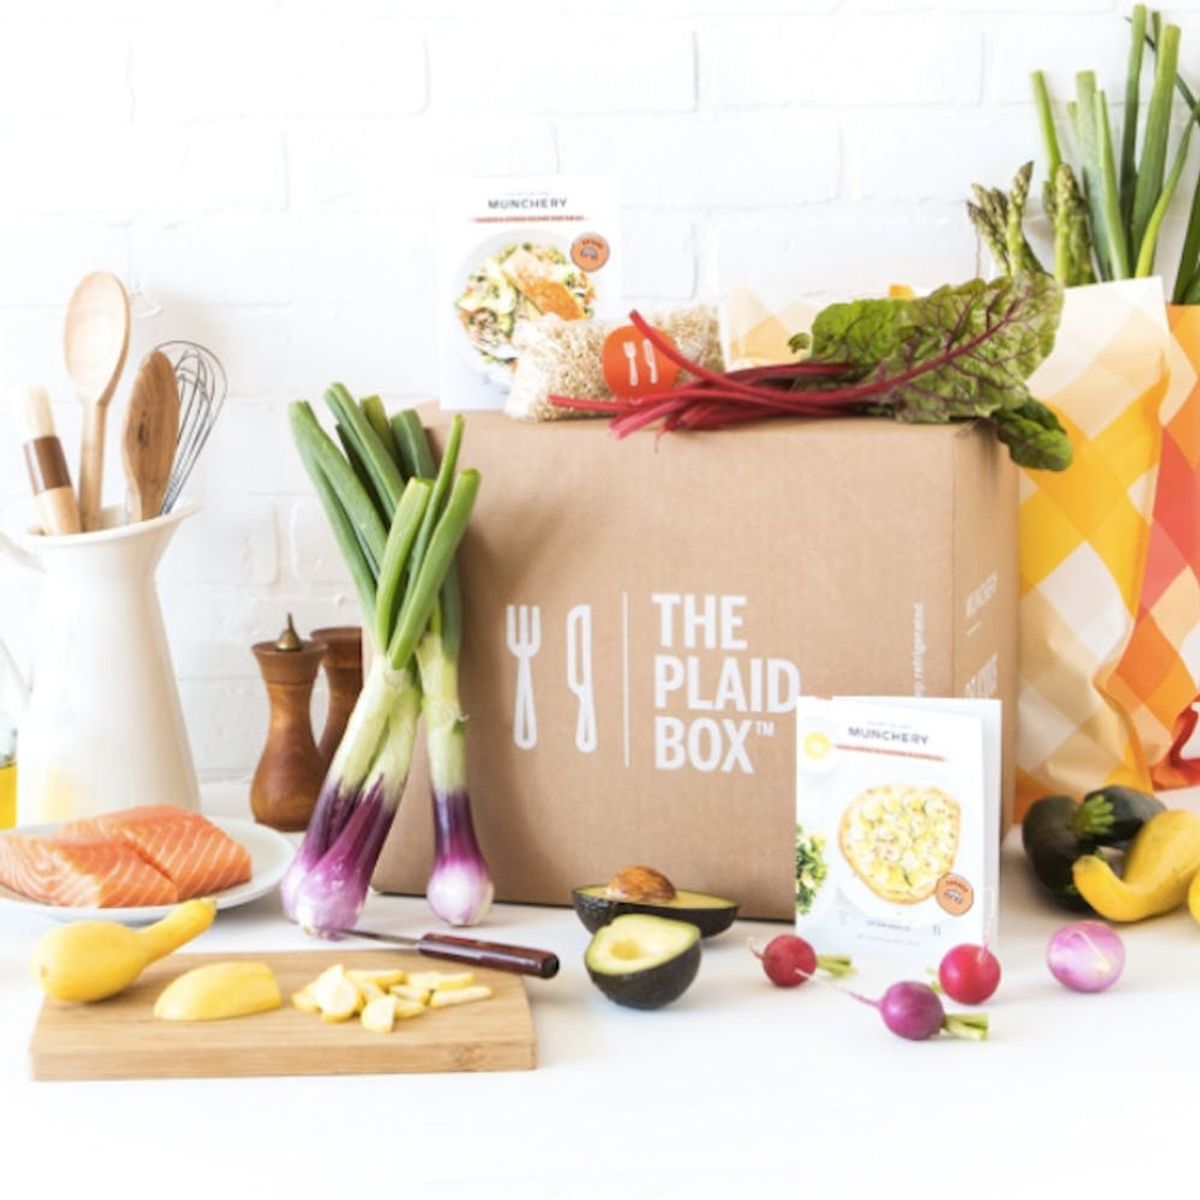 Think You Can’t Cook? These 10 Meal Subscription Boxes Want to Prove Otherwise